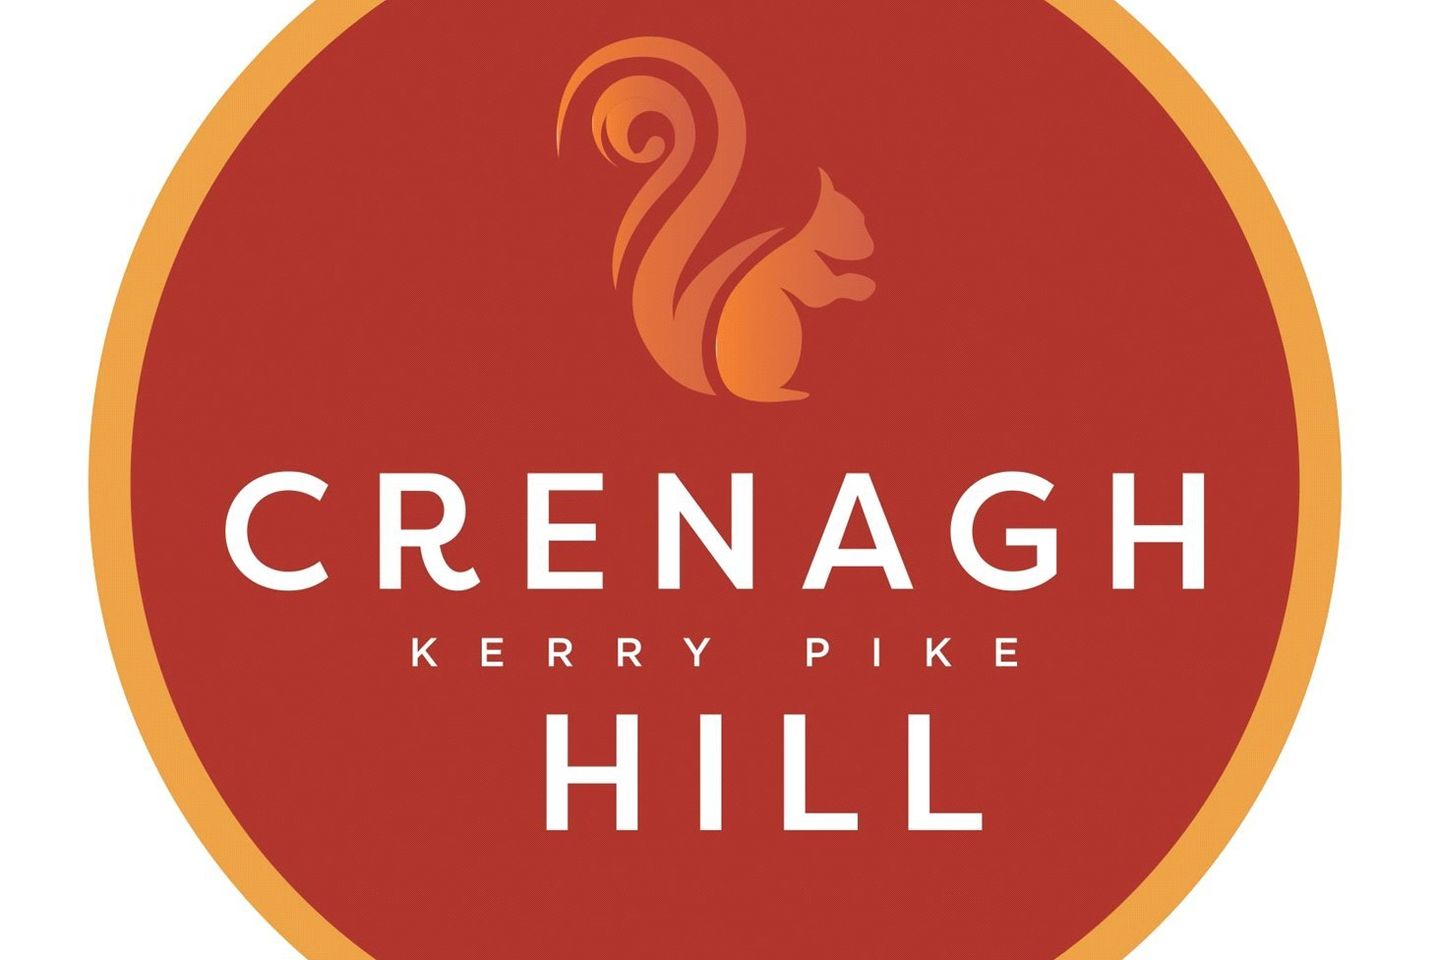 3 Bed Semi Detached, Crenagh Hill, 3 Bed Semi Detached, Crenagh Hill, Kerry Pike, Co. Cork